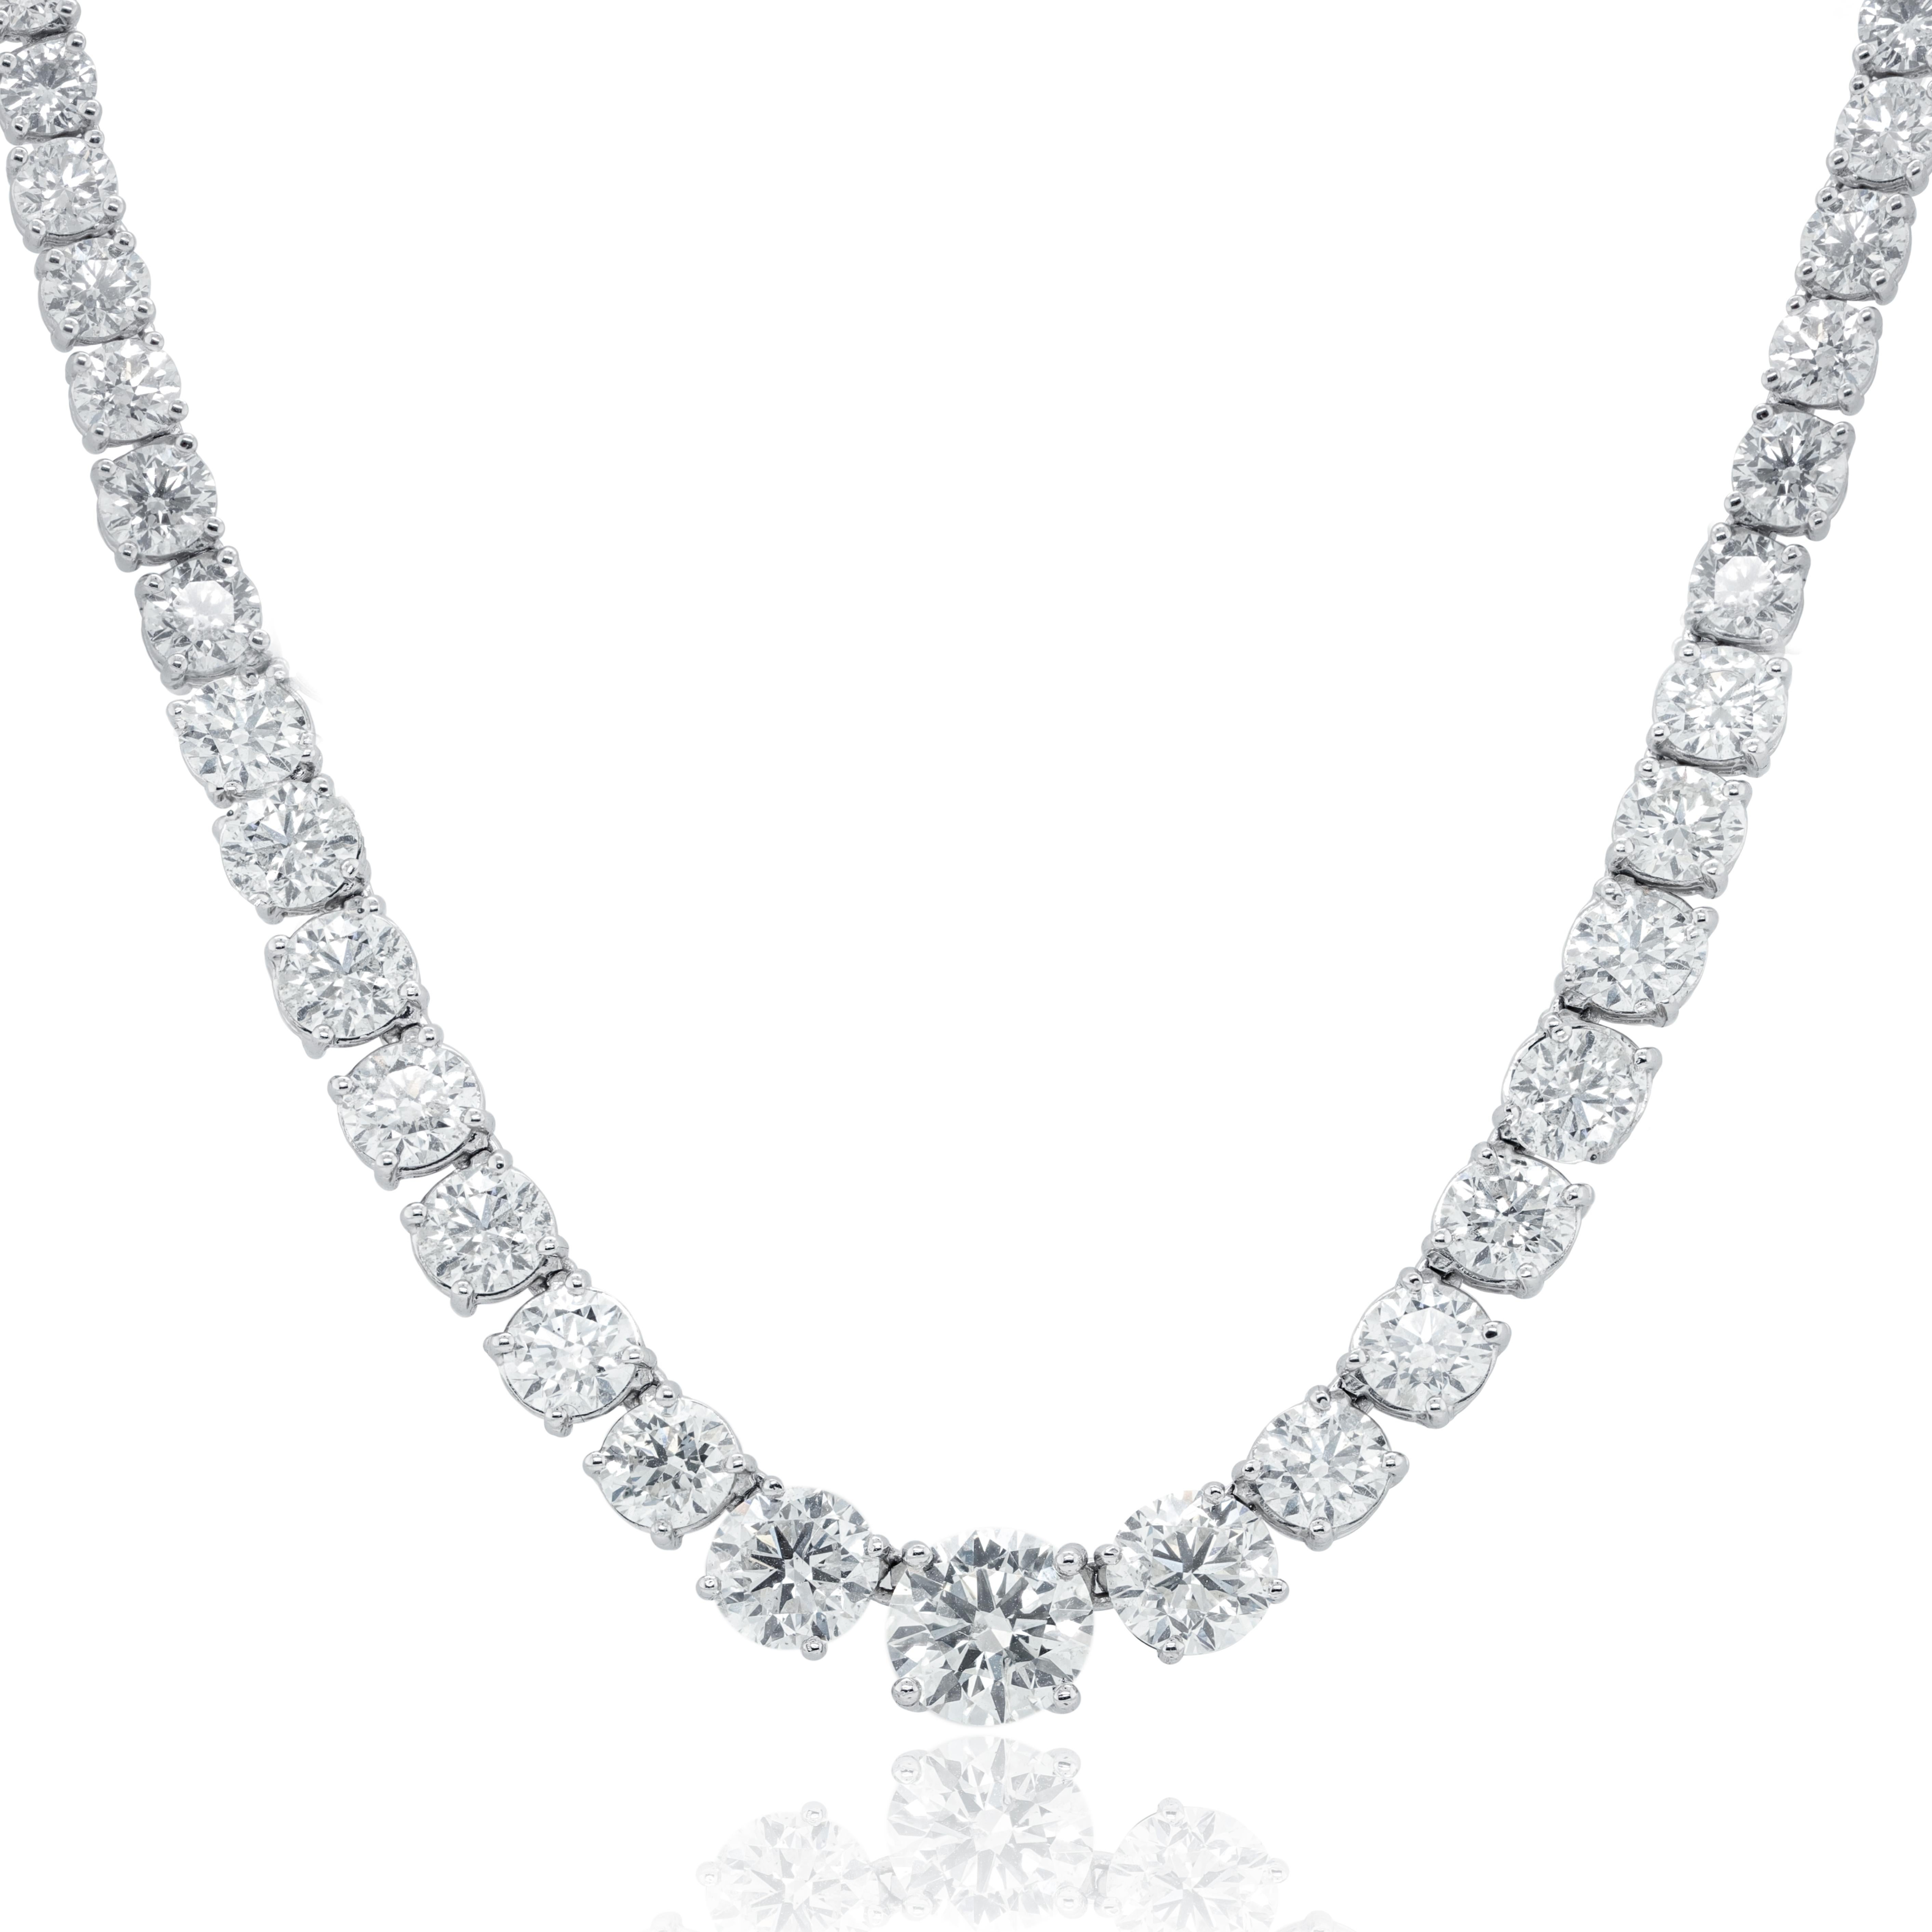 18KT white gold graduated four prong tennis necklace, features 31.00 cts of round diamonds. Center stone is 2.40 cts round and 3.12 cts next 2 stones.

This product comes with a certificate of appraisal
This product will be packaged in a custom